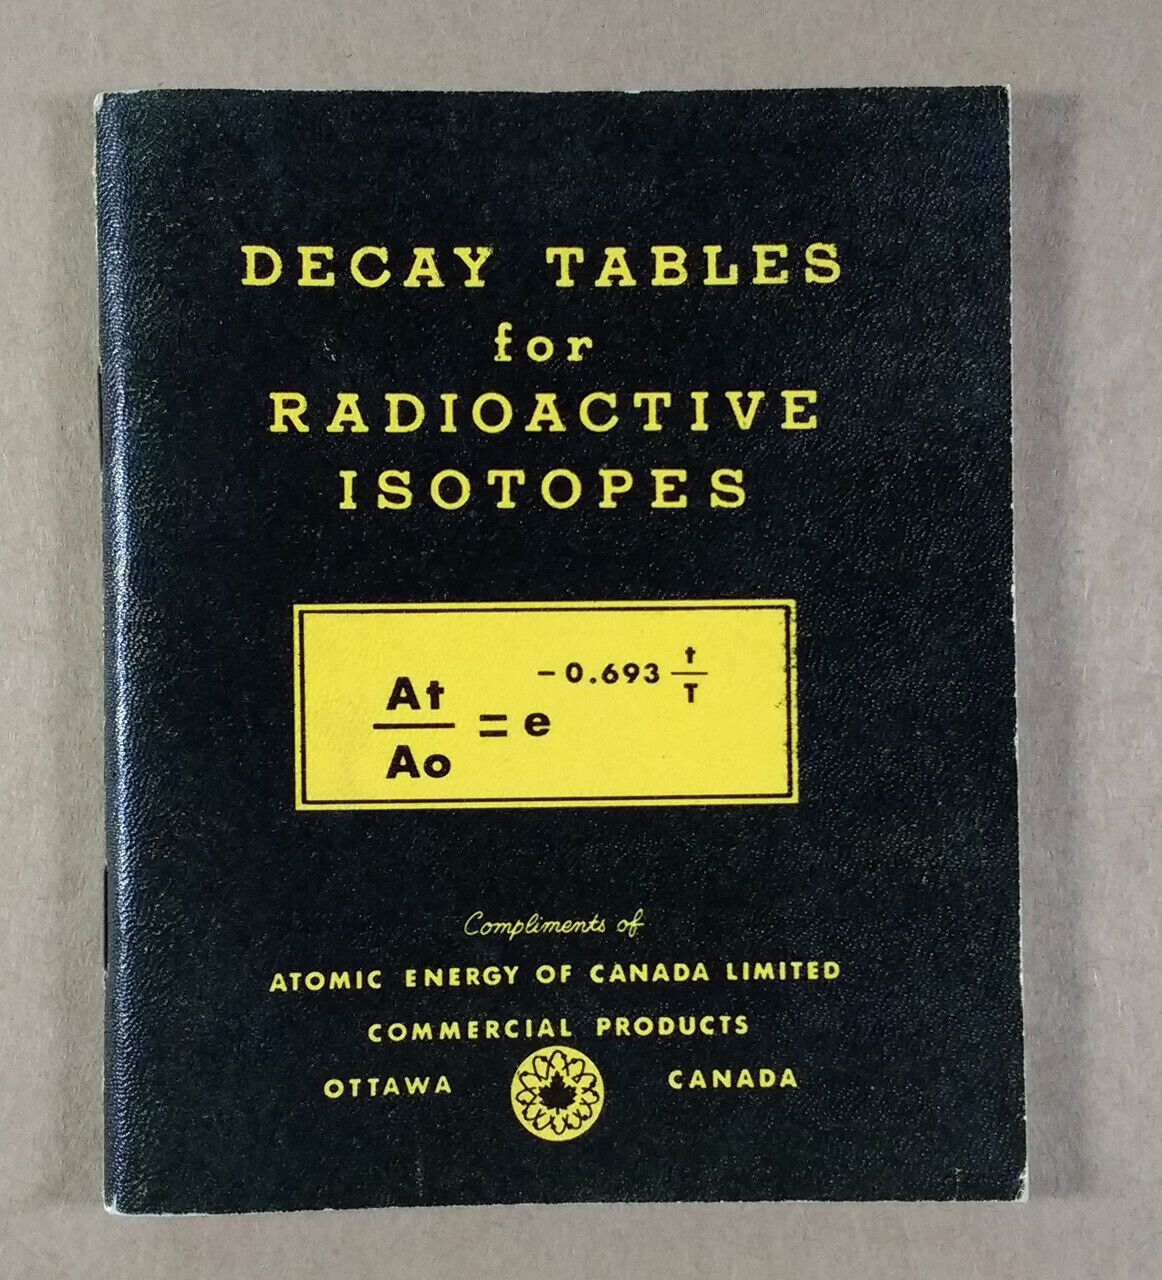 Decay Tables for Radioactive Isotopes Atomic Energy of Canada book booklet